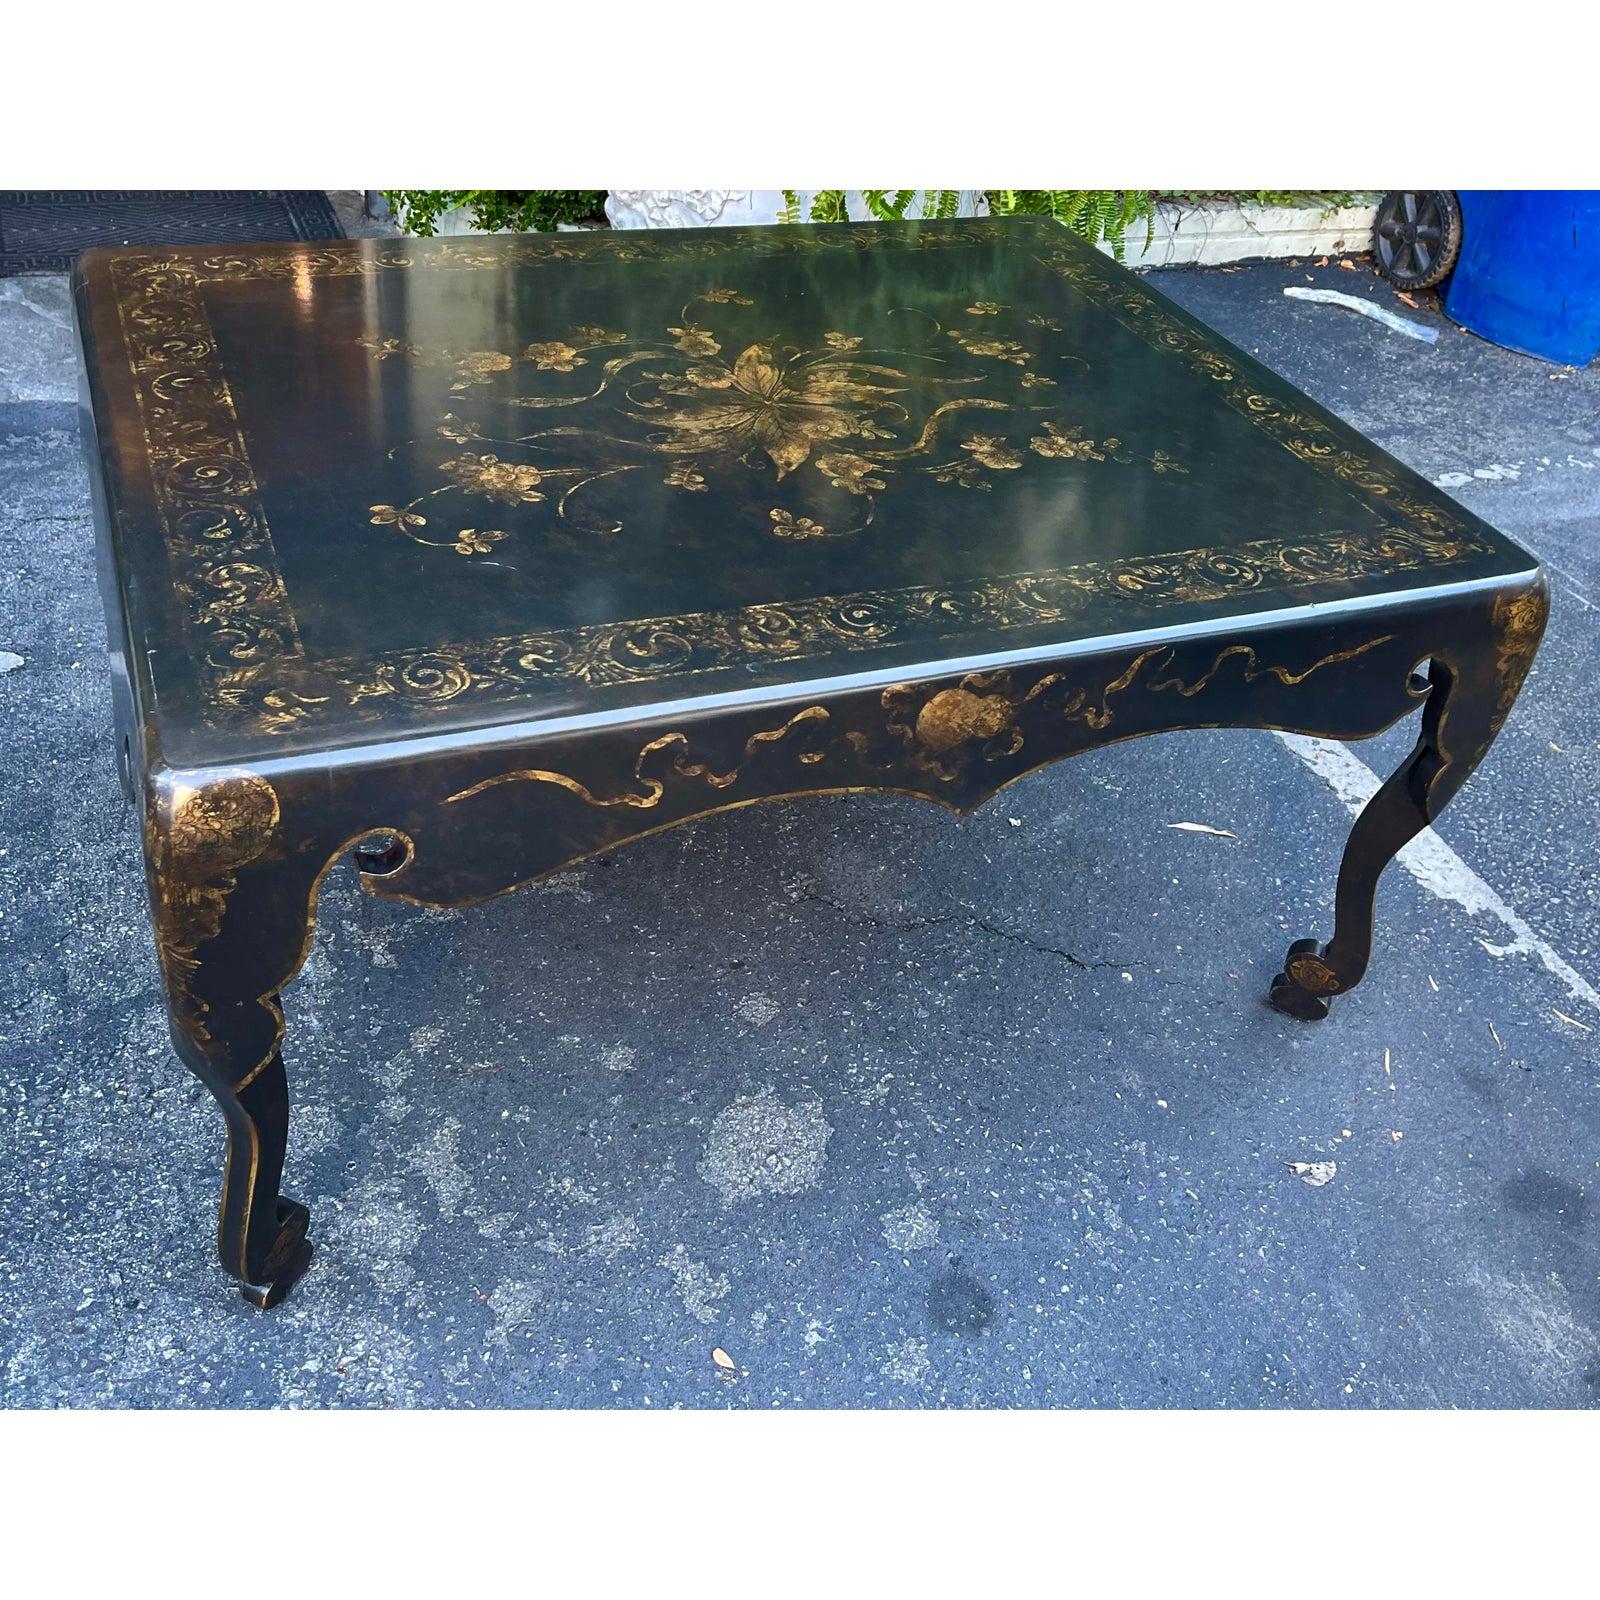 American Black & Gold Chinoiserie Cocktail Coffee Cocktail or Tea Table